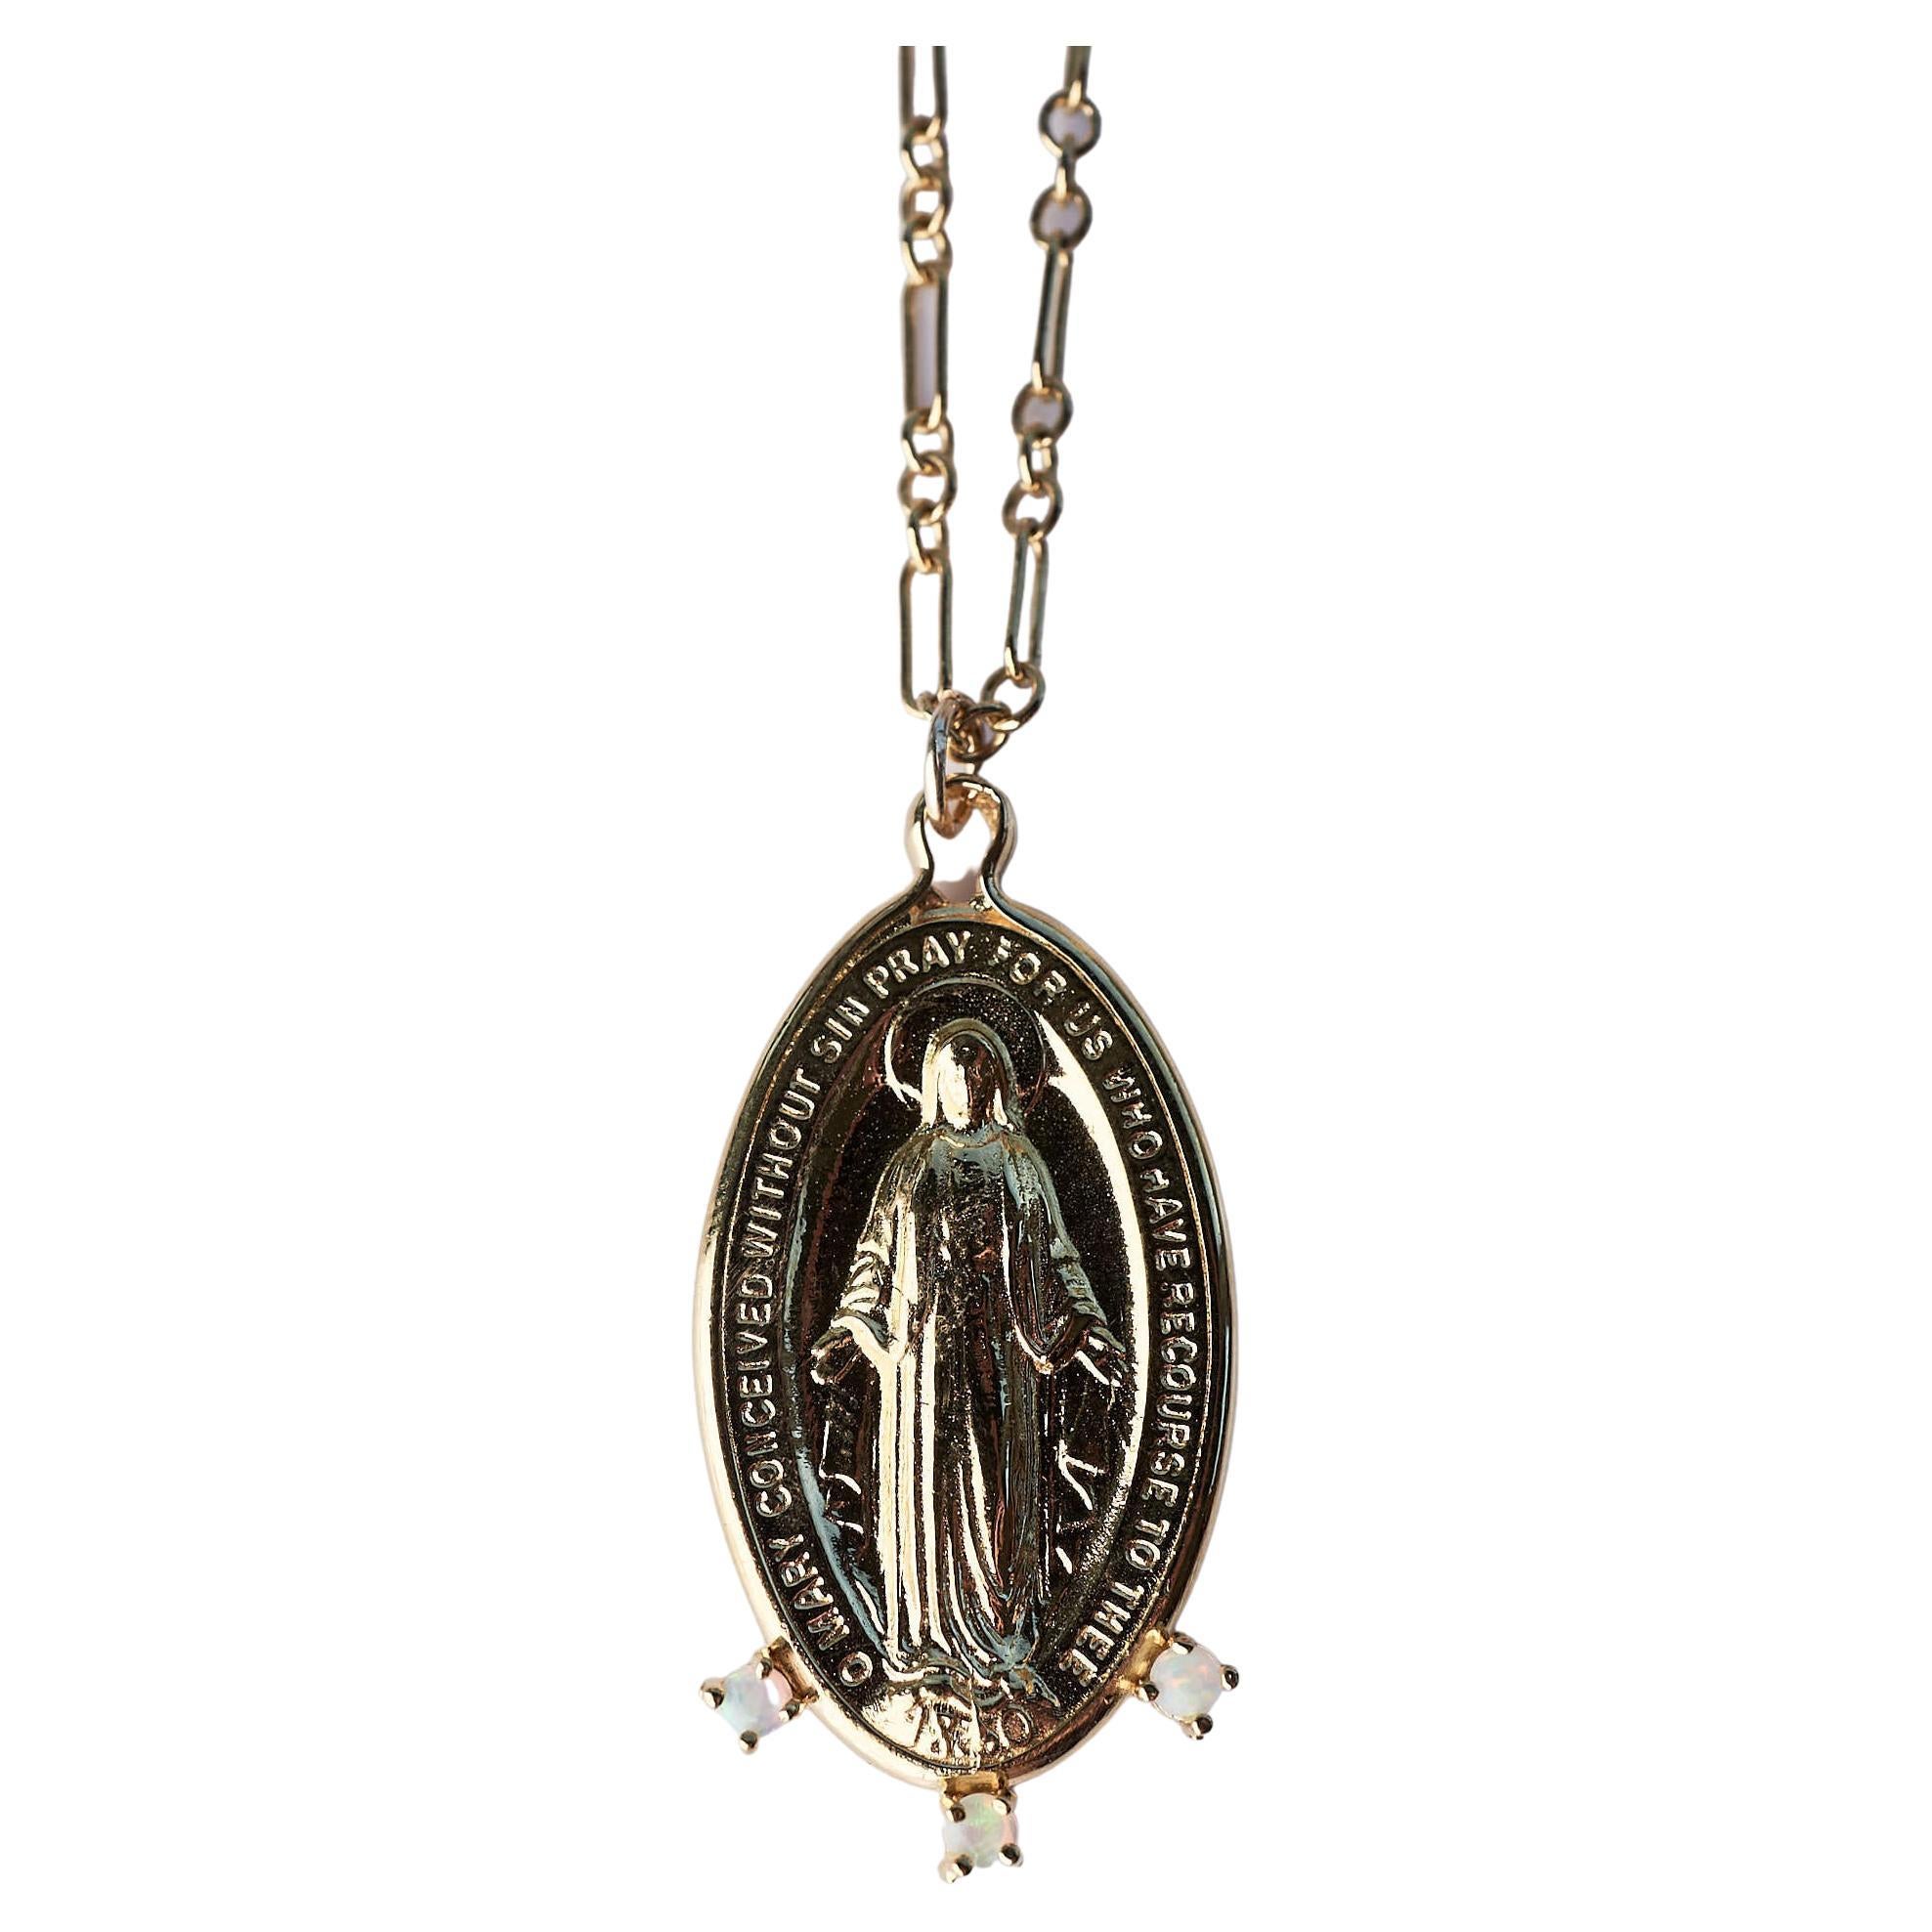 Oval Medal Chain Opal Necklace Virgin Mary Gold Plated J Dauphin For Sale